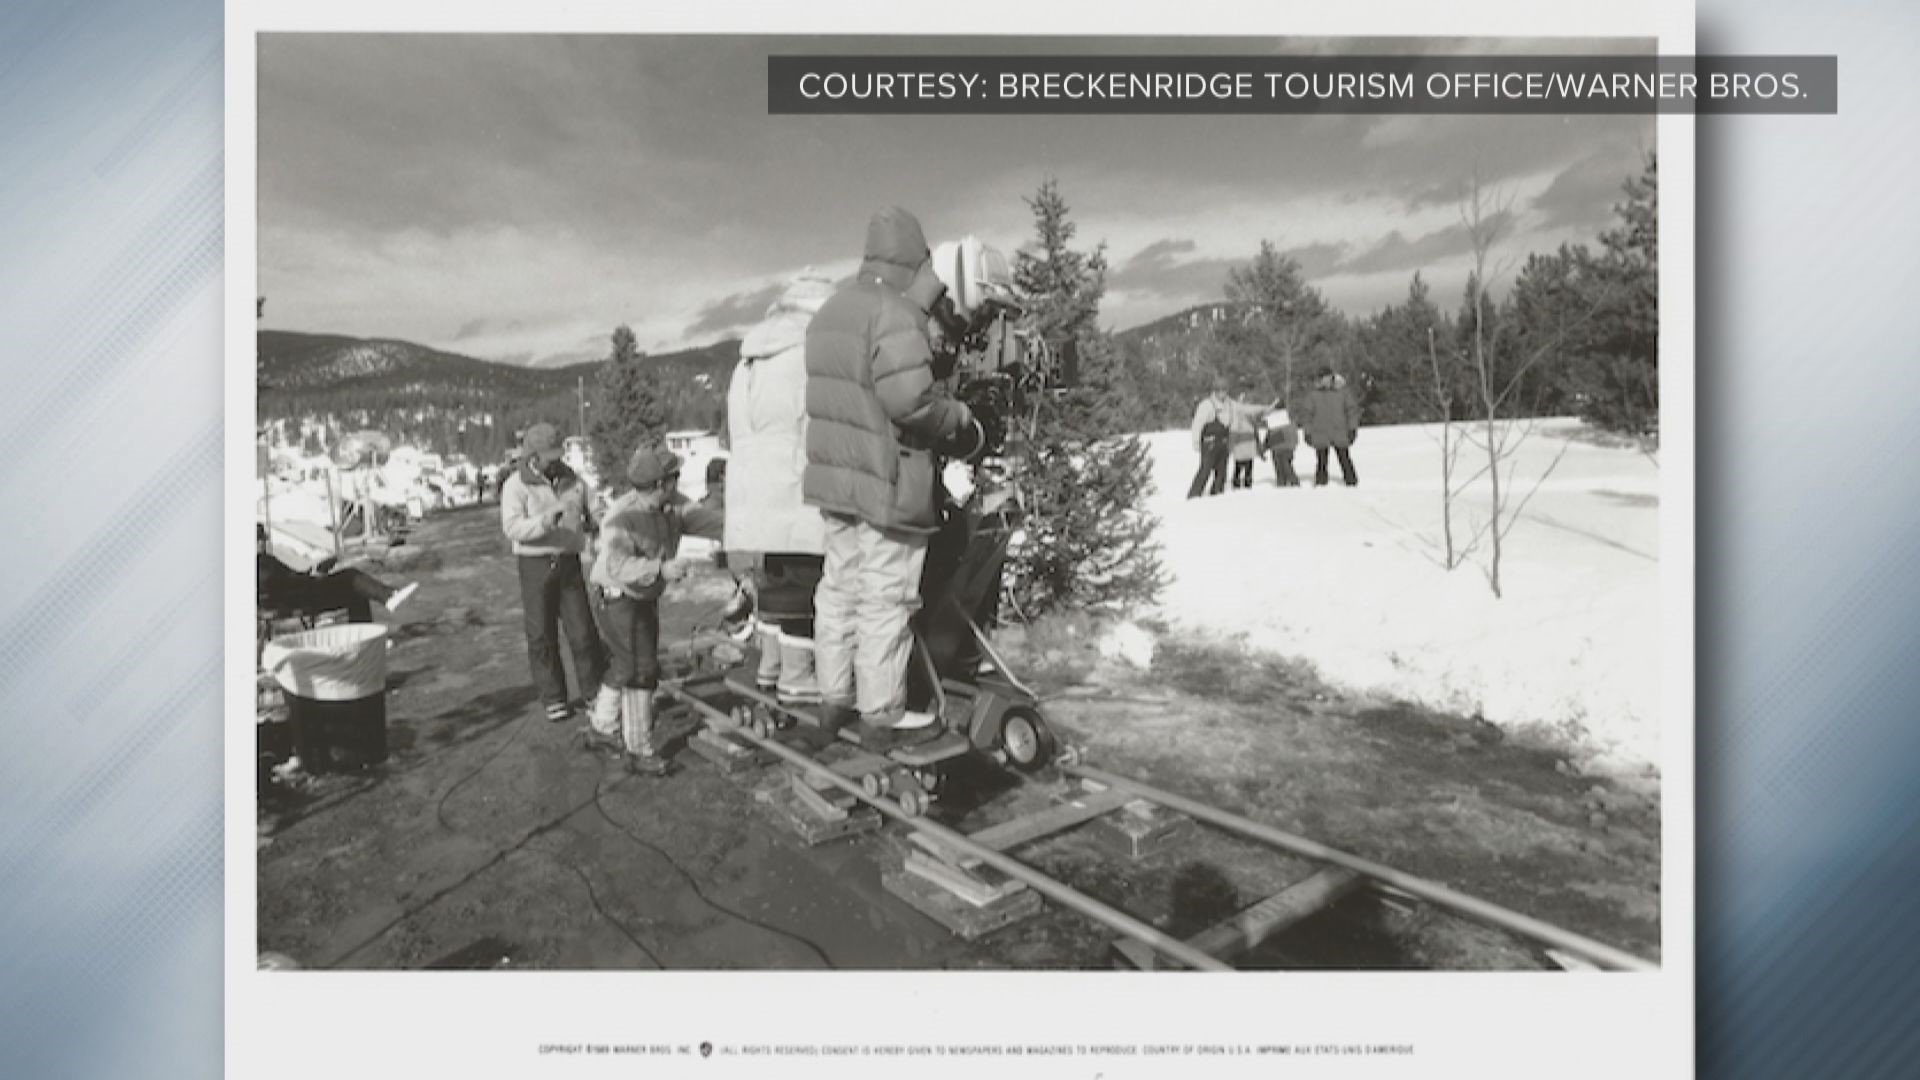 The Breckenridge Tourism Office took us back in time to where some scenes from the movie Christmas Vacation were shot in Colorado in 1989.